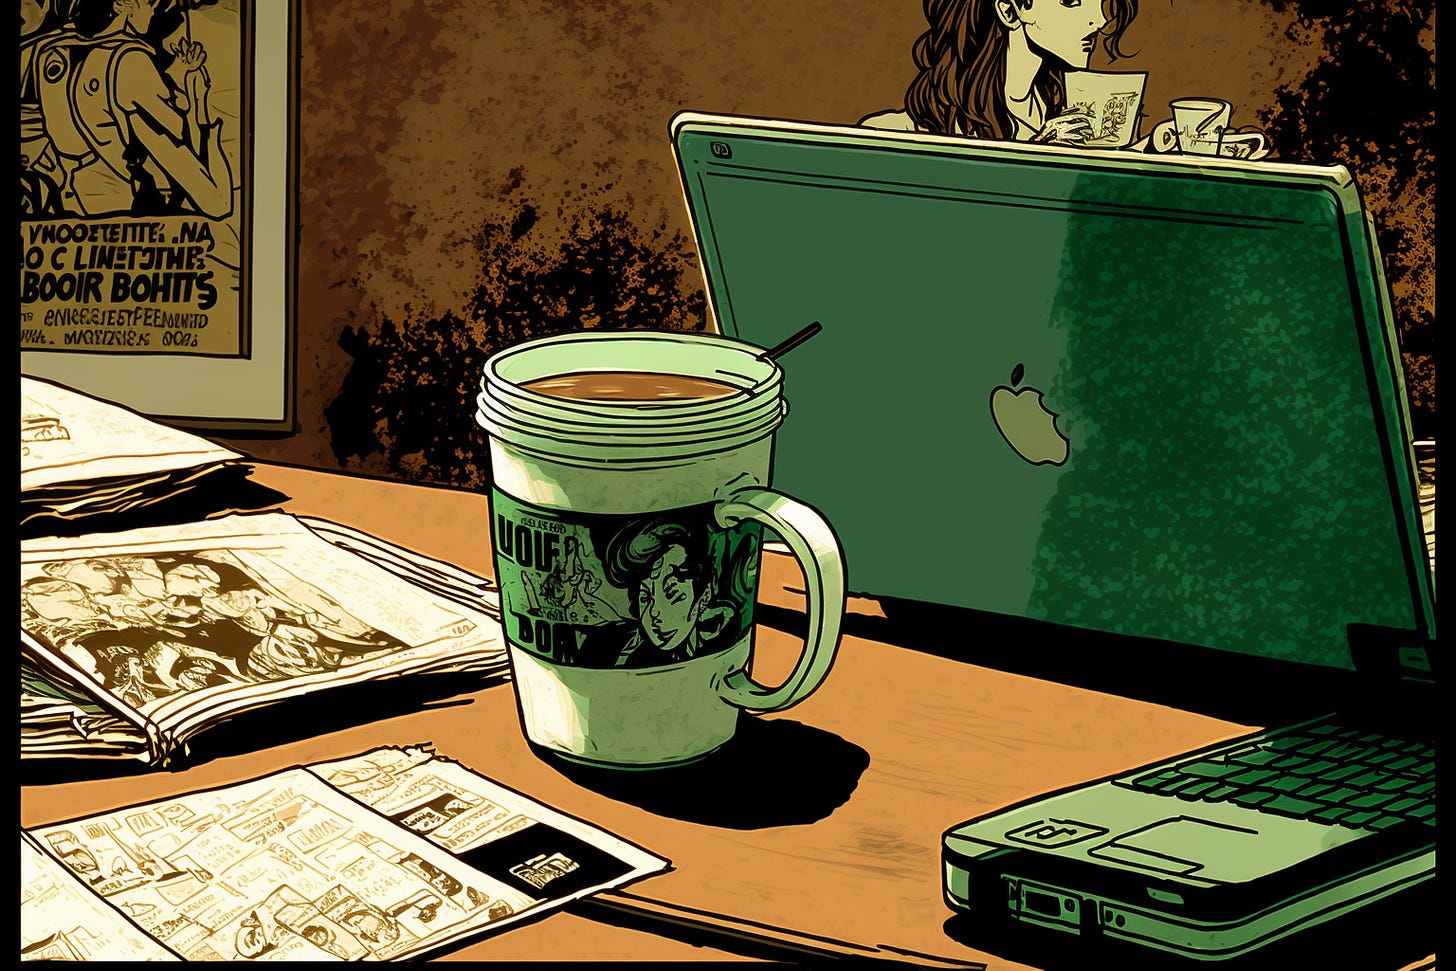 laptops with coffee cups, graphic novel